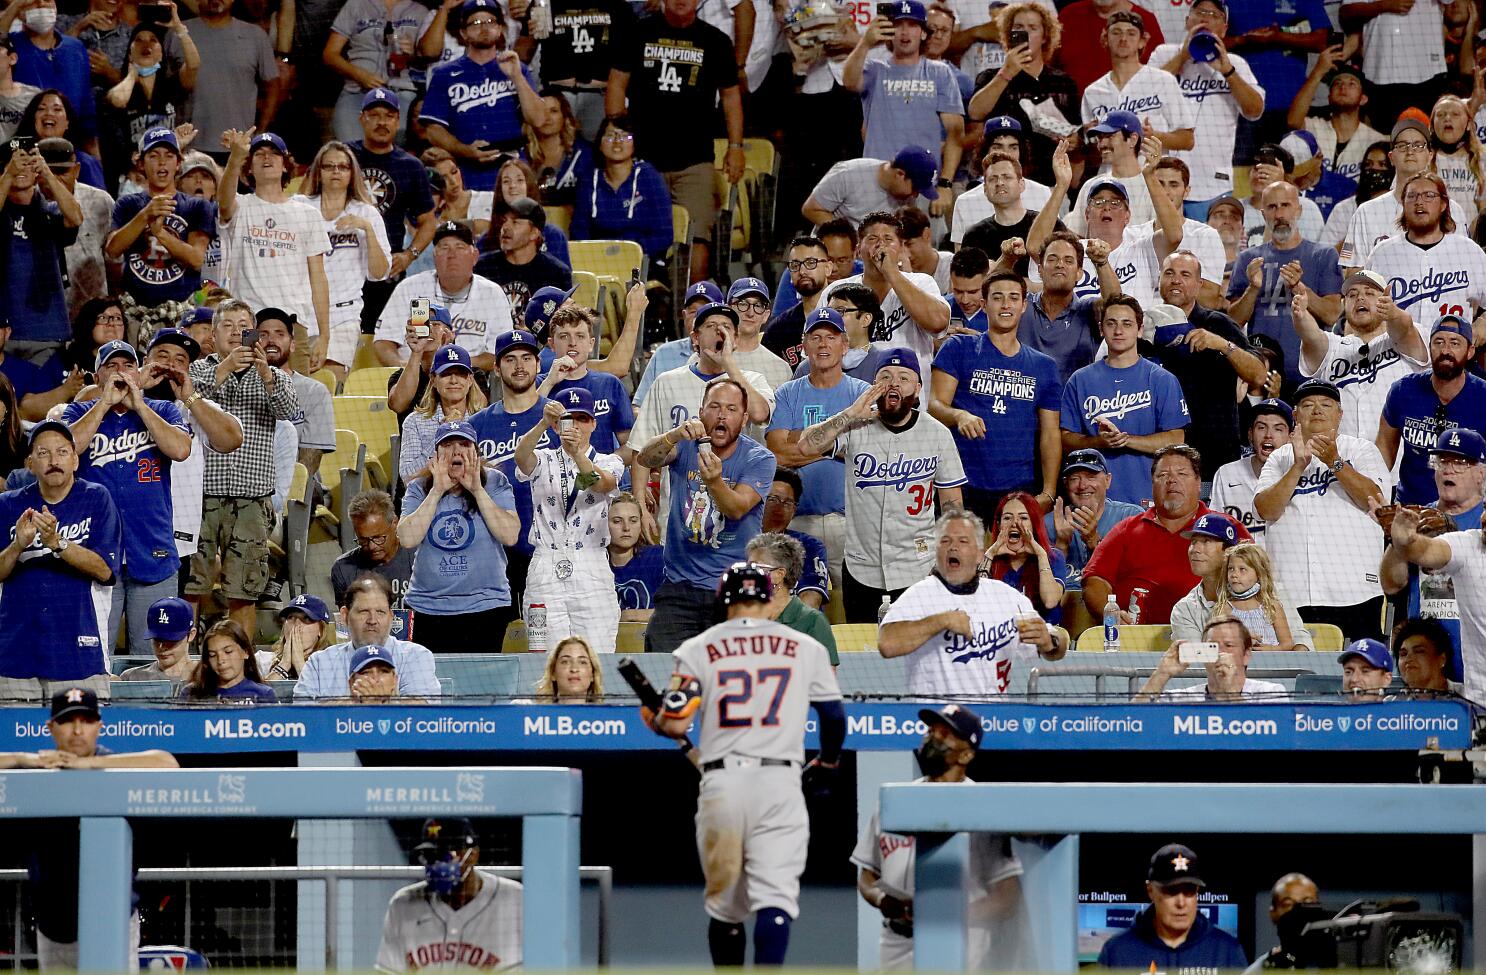 Dodgers fans must boo Houston Astros for stolen World Series - Los